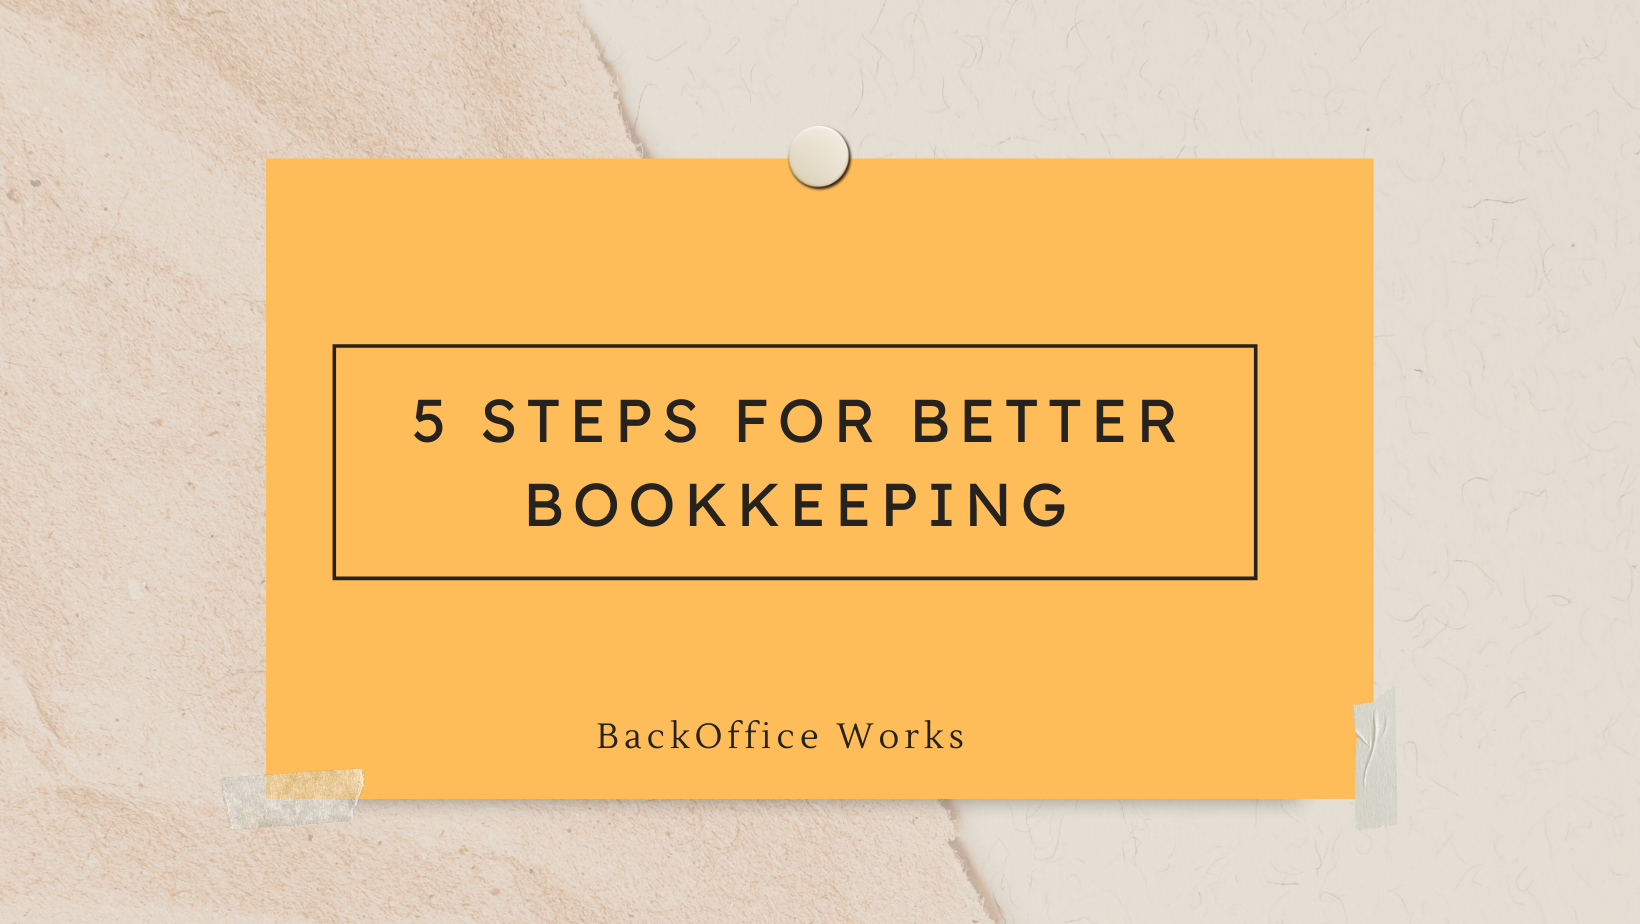 5 Steps For Better Bookkeeping